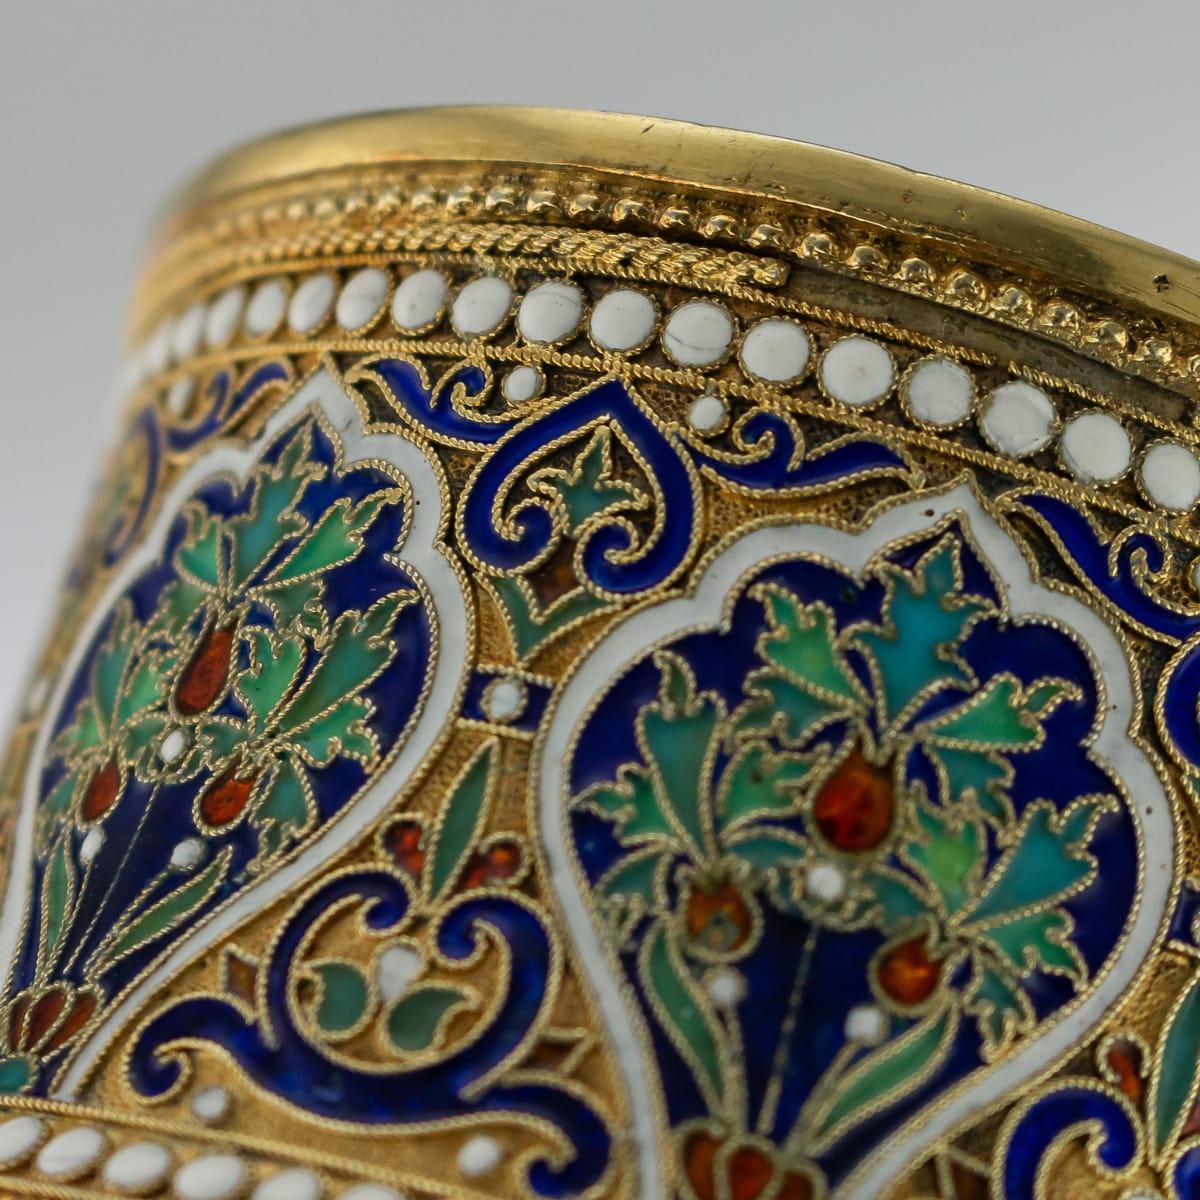 19th Century Imperial Russian Solid Silver-Gilt and Enamel Cup on Saucer 5